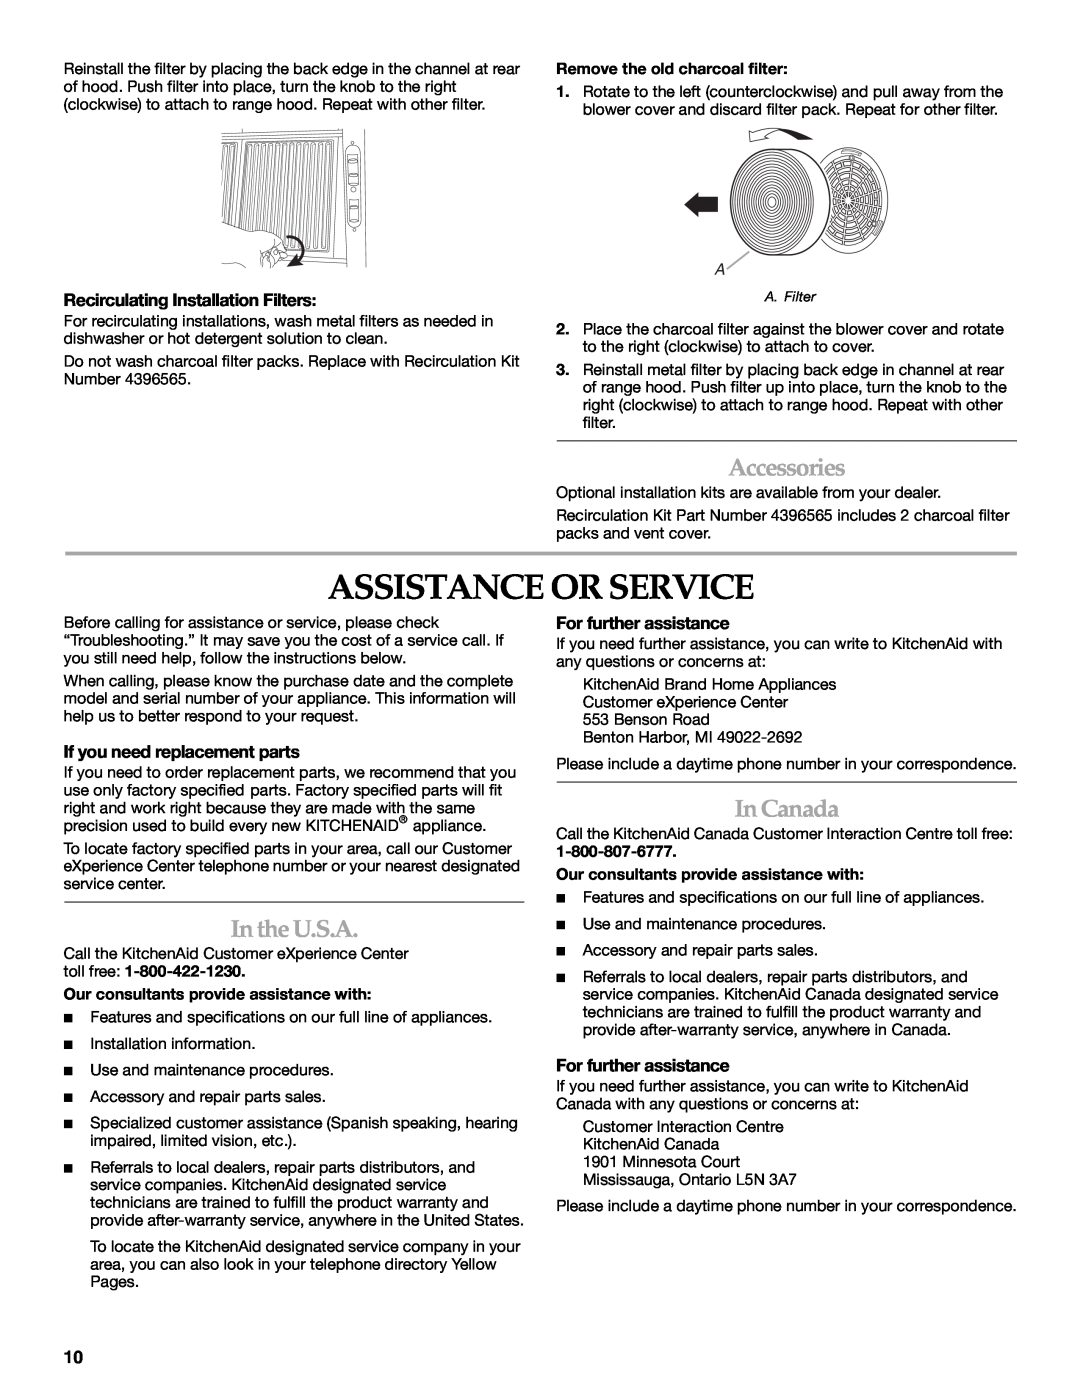 KitchenAid 2005 Assistance Or Service, Accessories, In the U.S.A, In Canada, Recirculating Installation Filters 